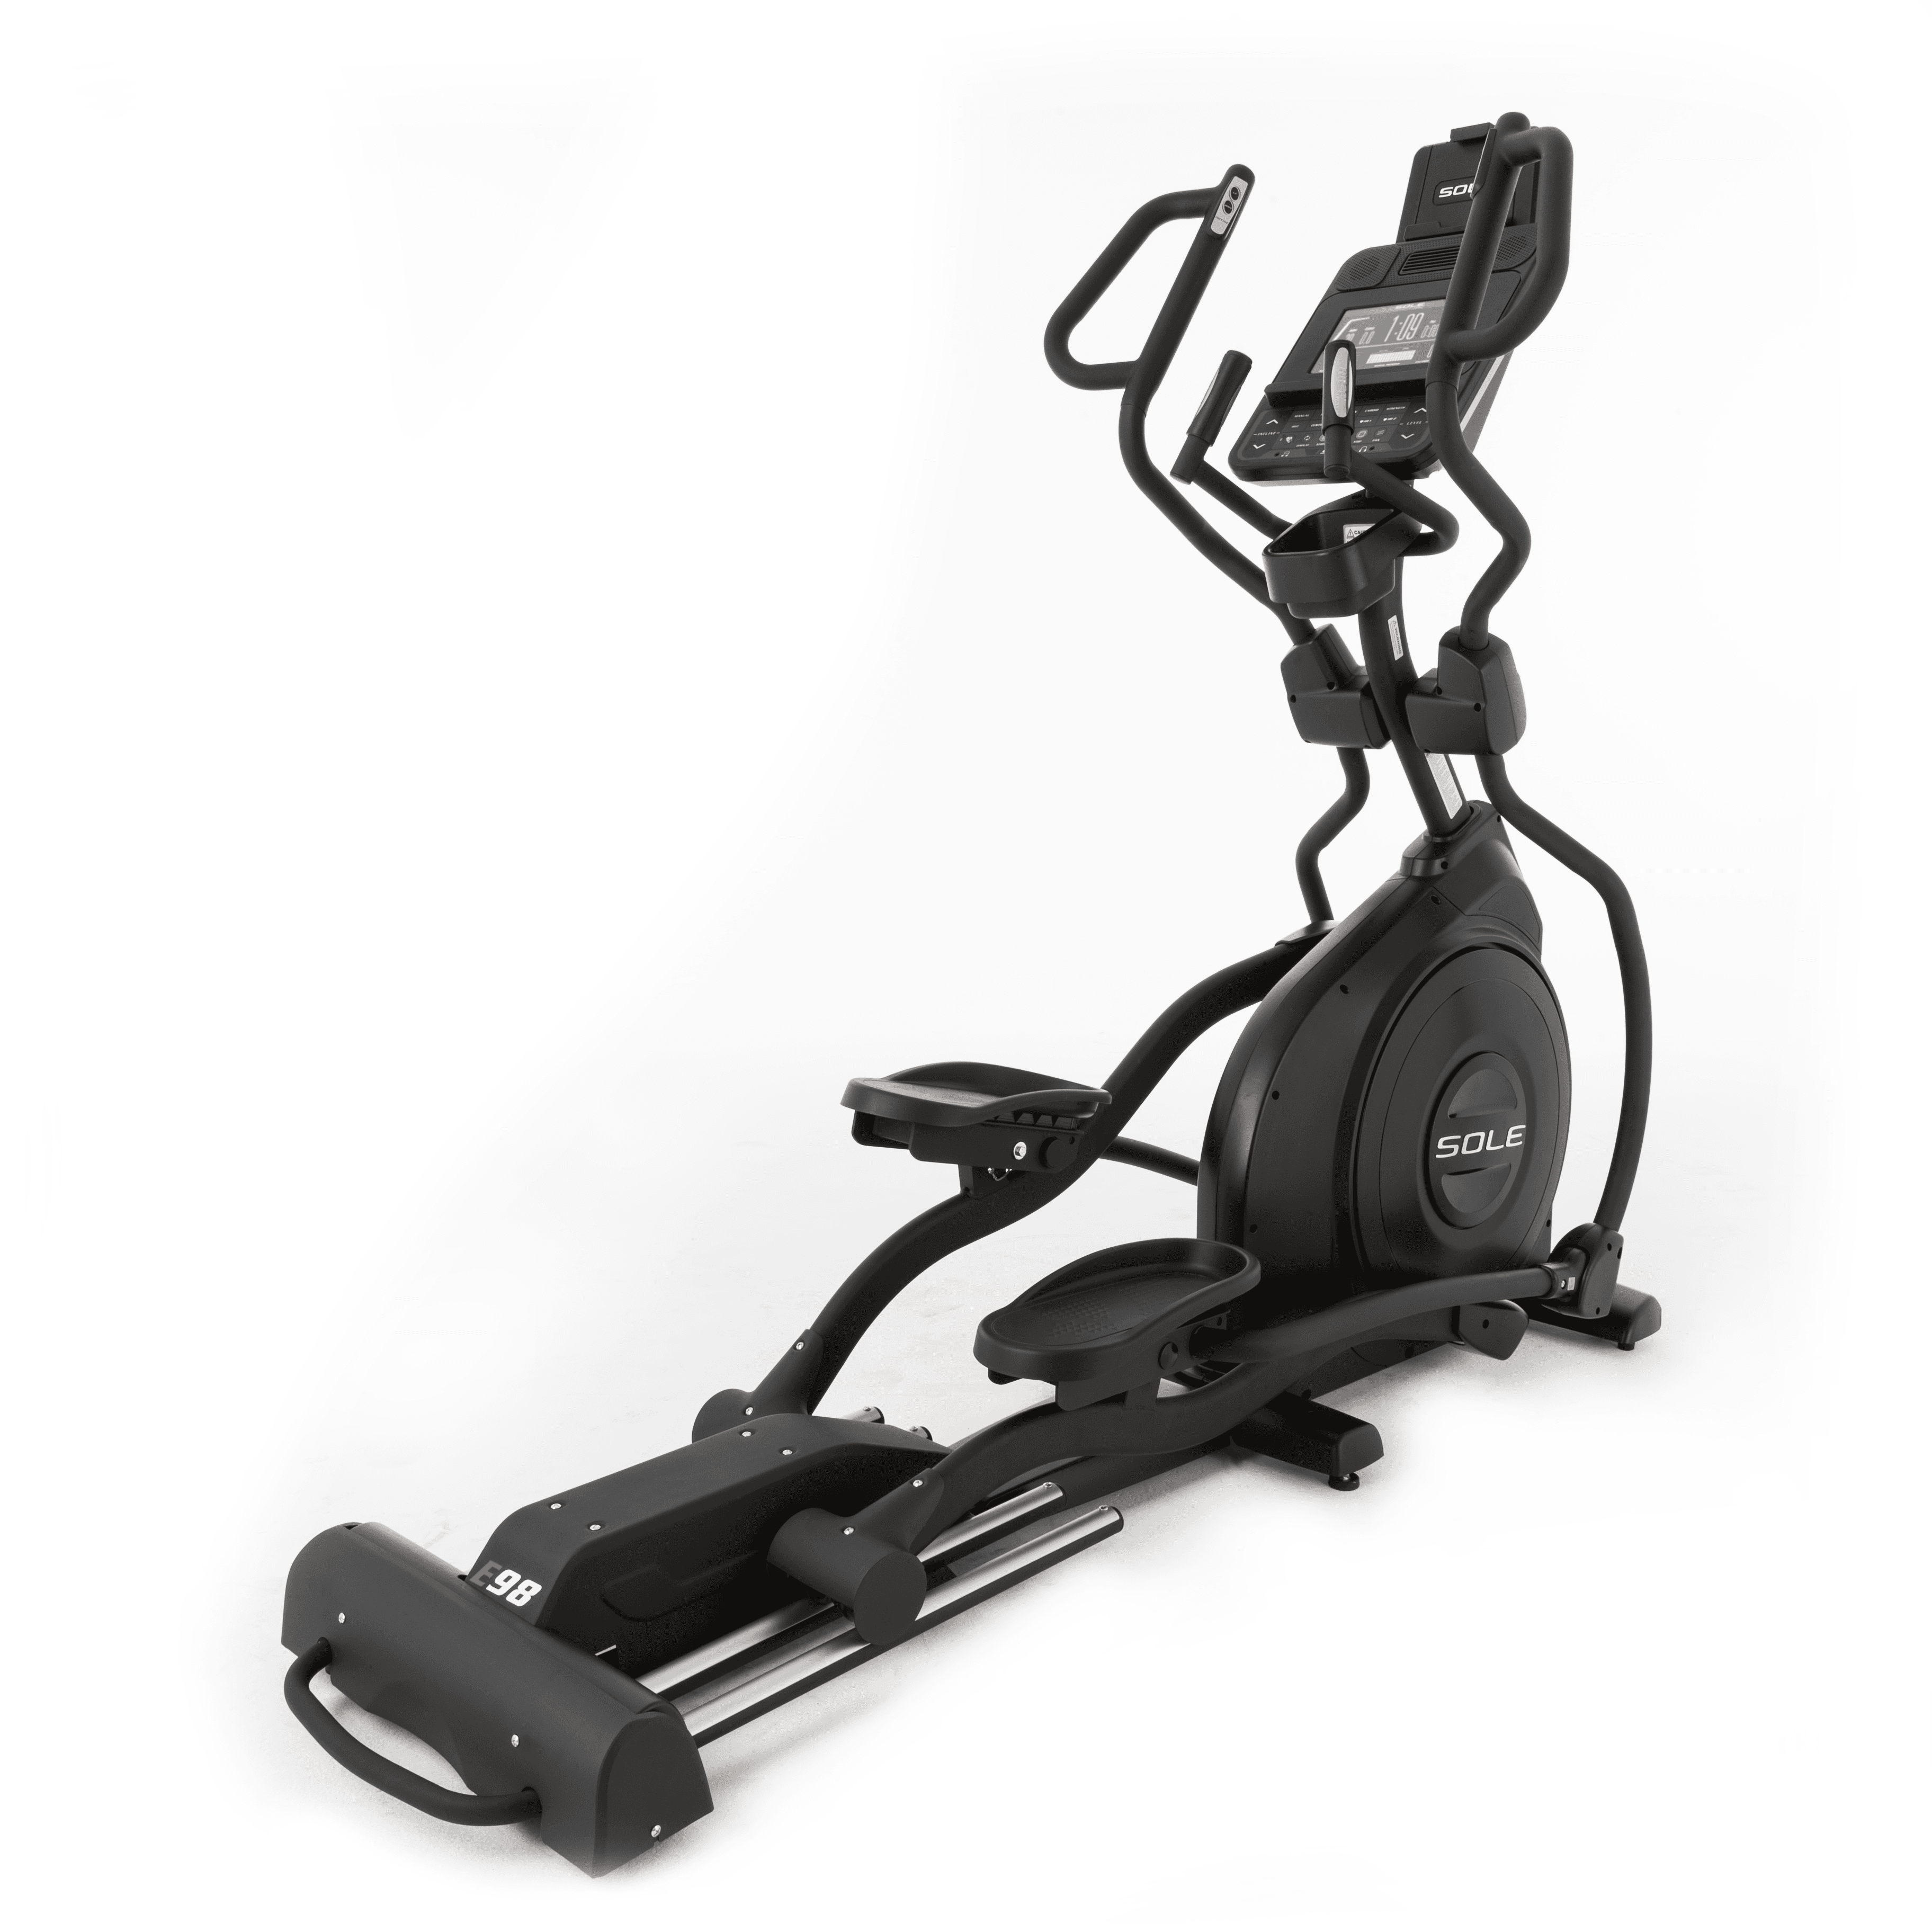 The Sole Light Commercial E98 functions as beautifully as commercial elliptical trainers that have double the MSRP.